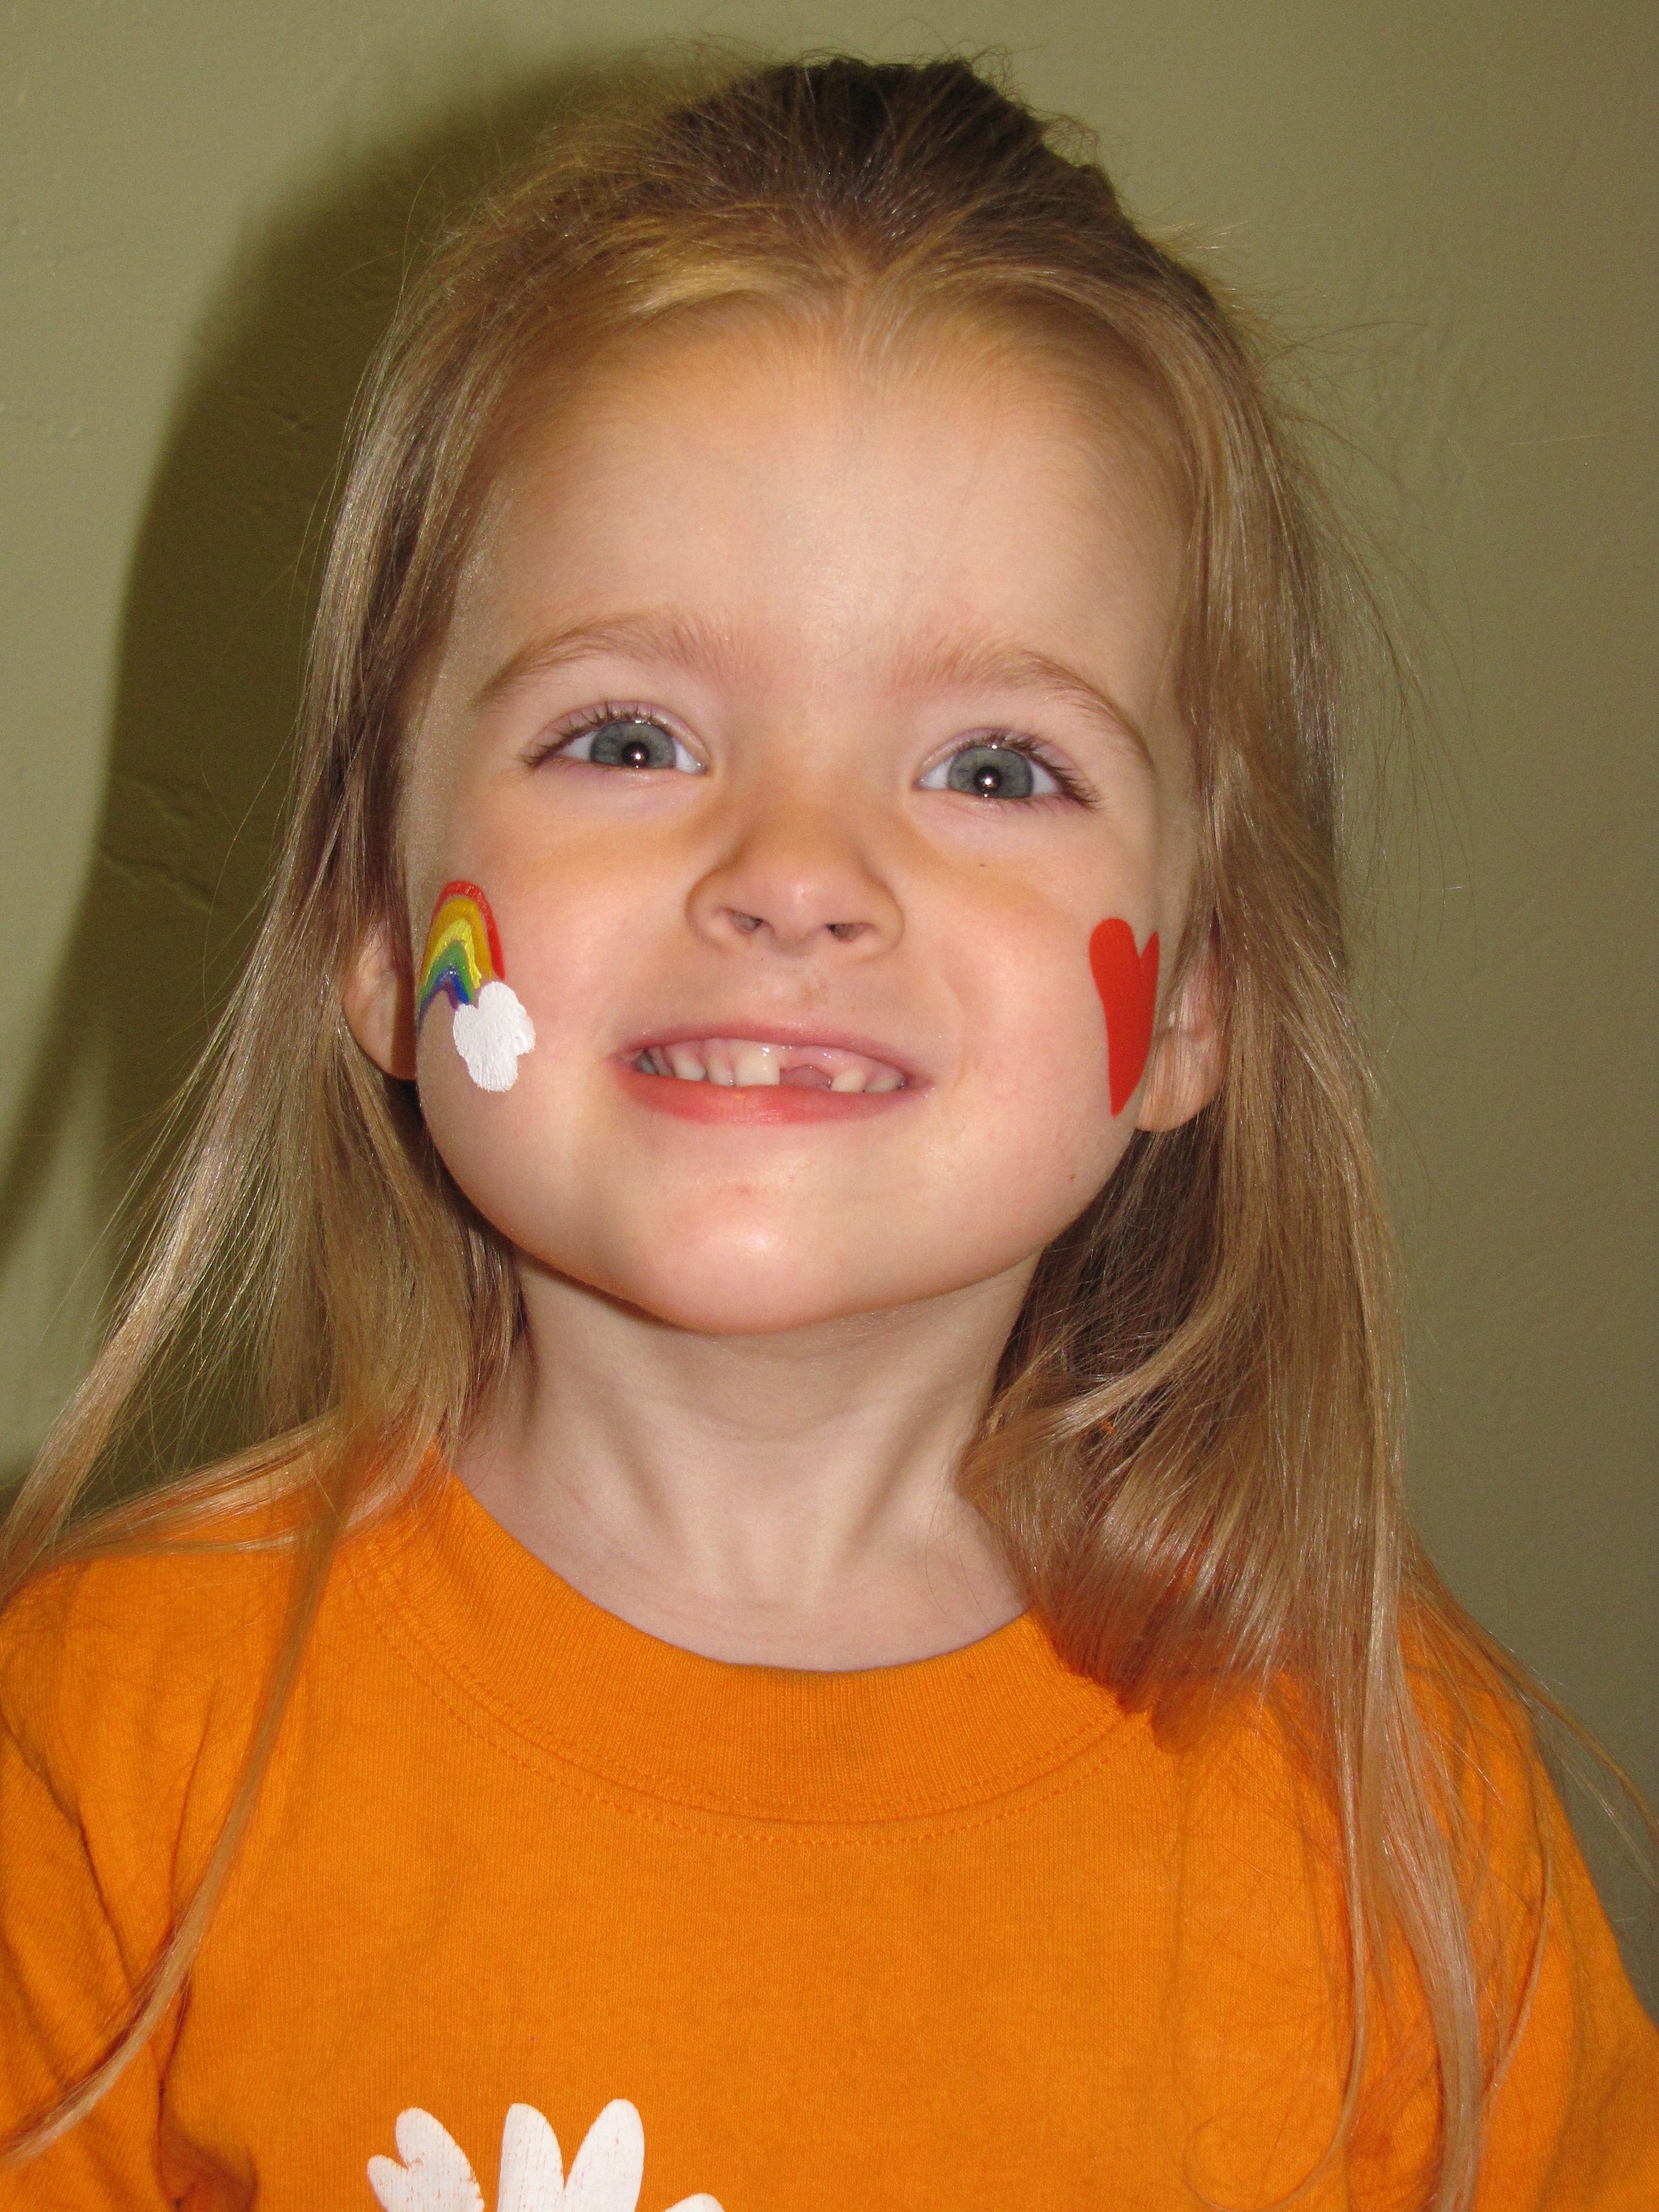 Toddler Tuesday: Face Painting